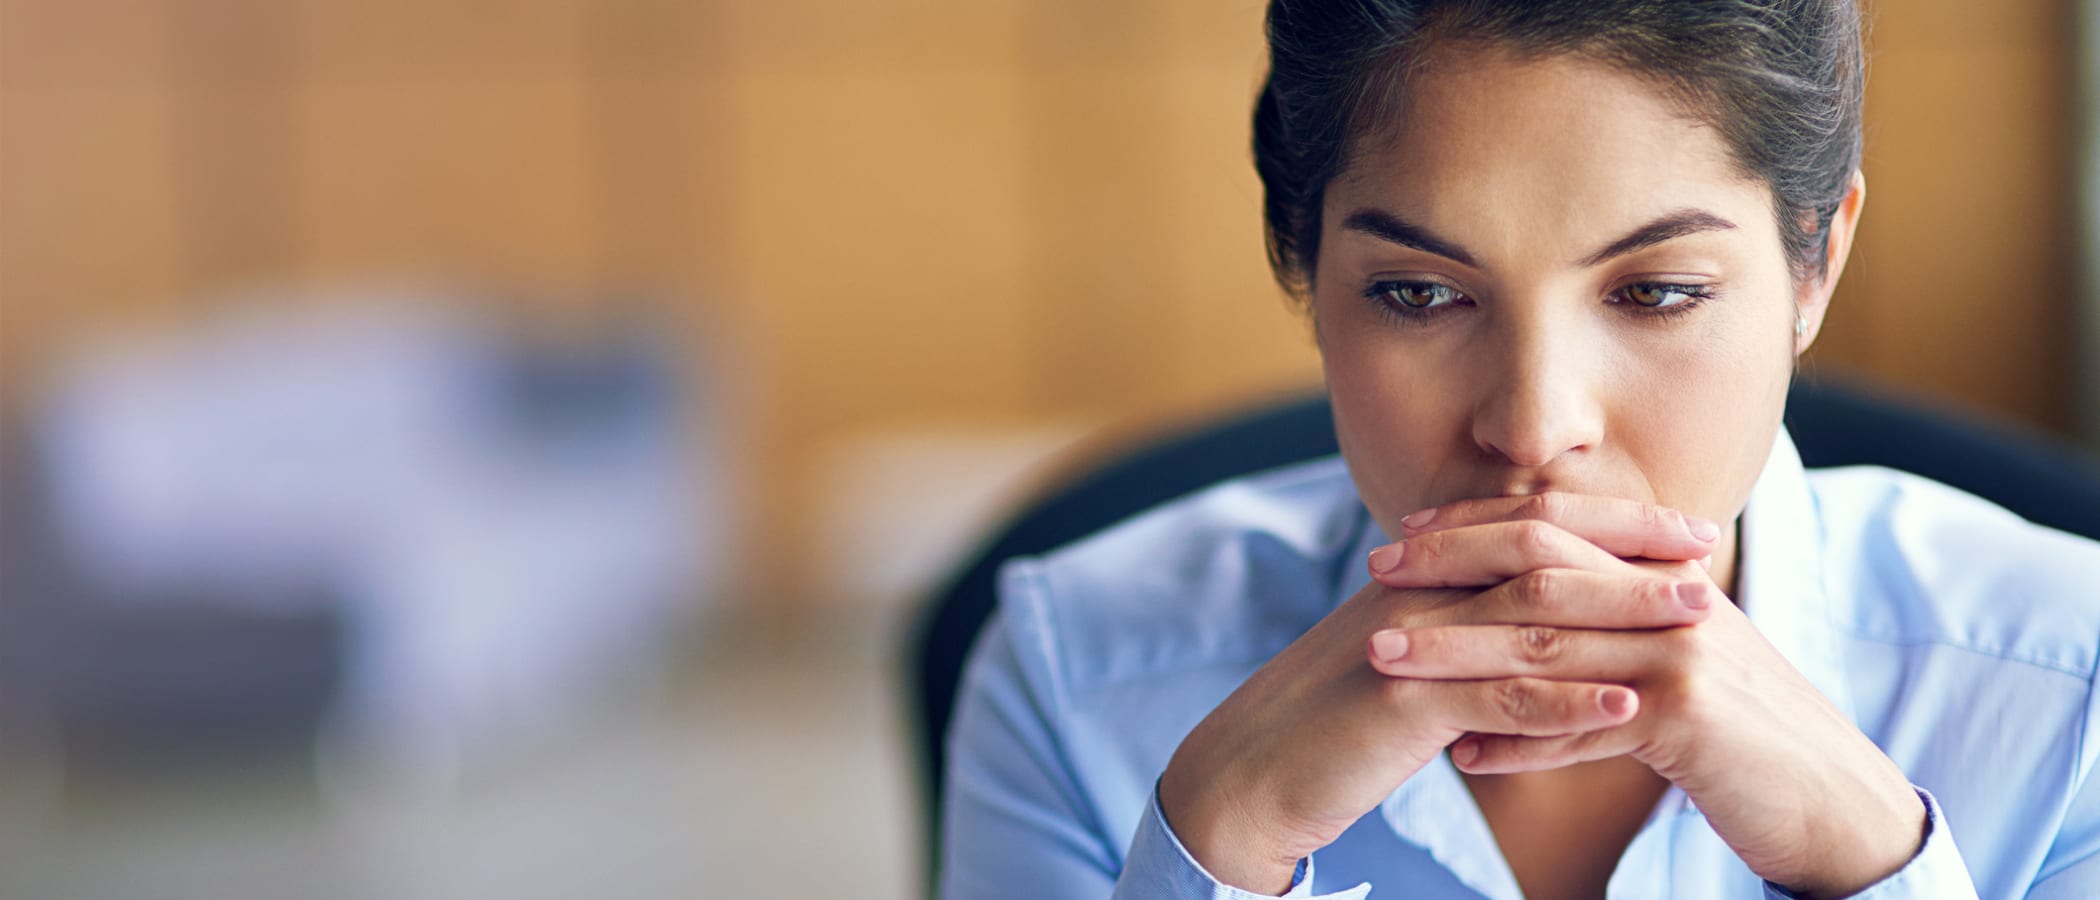 When Should Employers Tell Employees That Layoffs Are Looming?